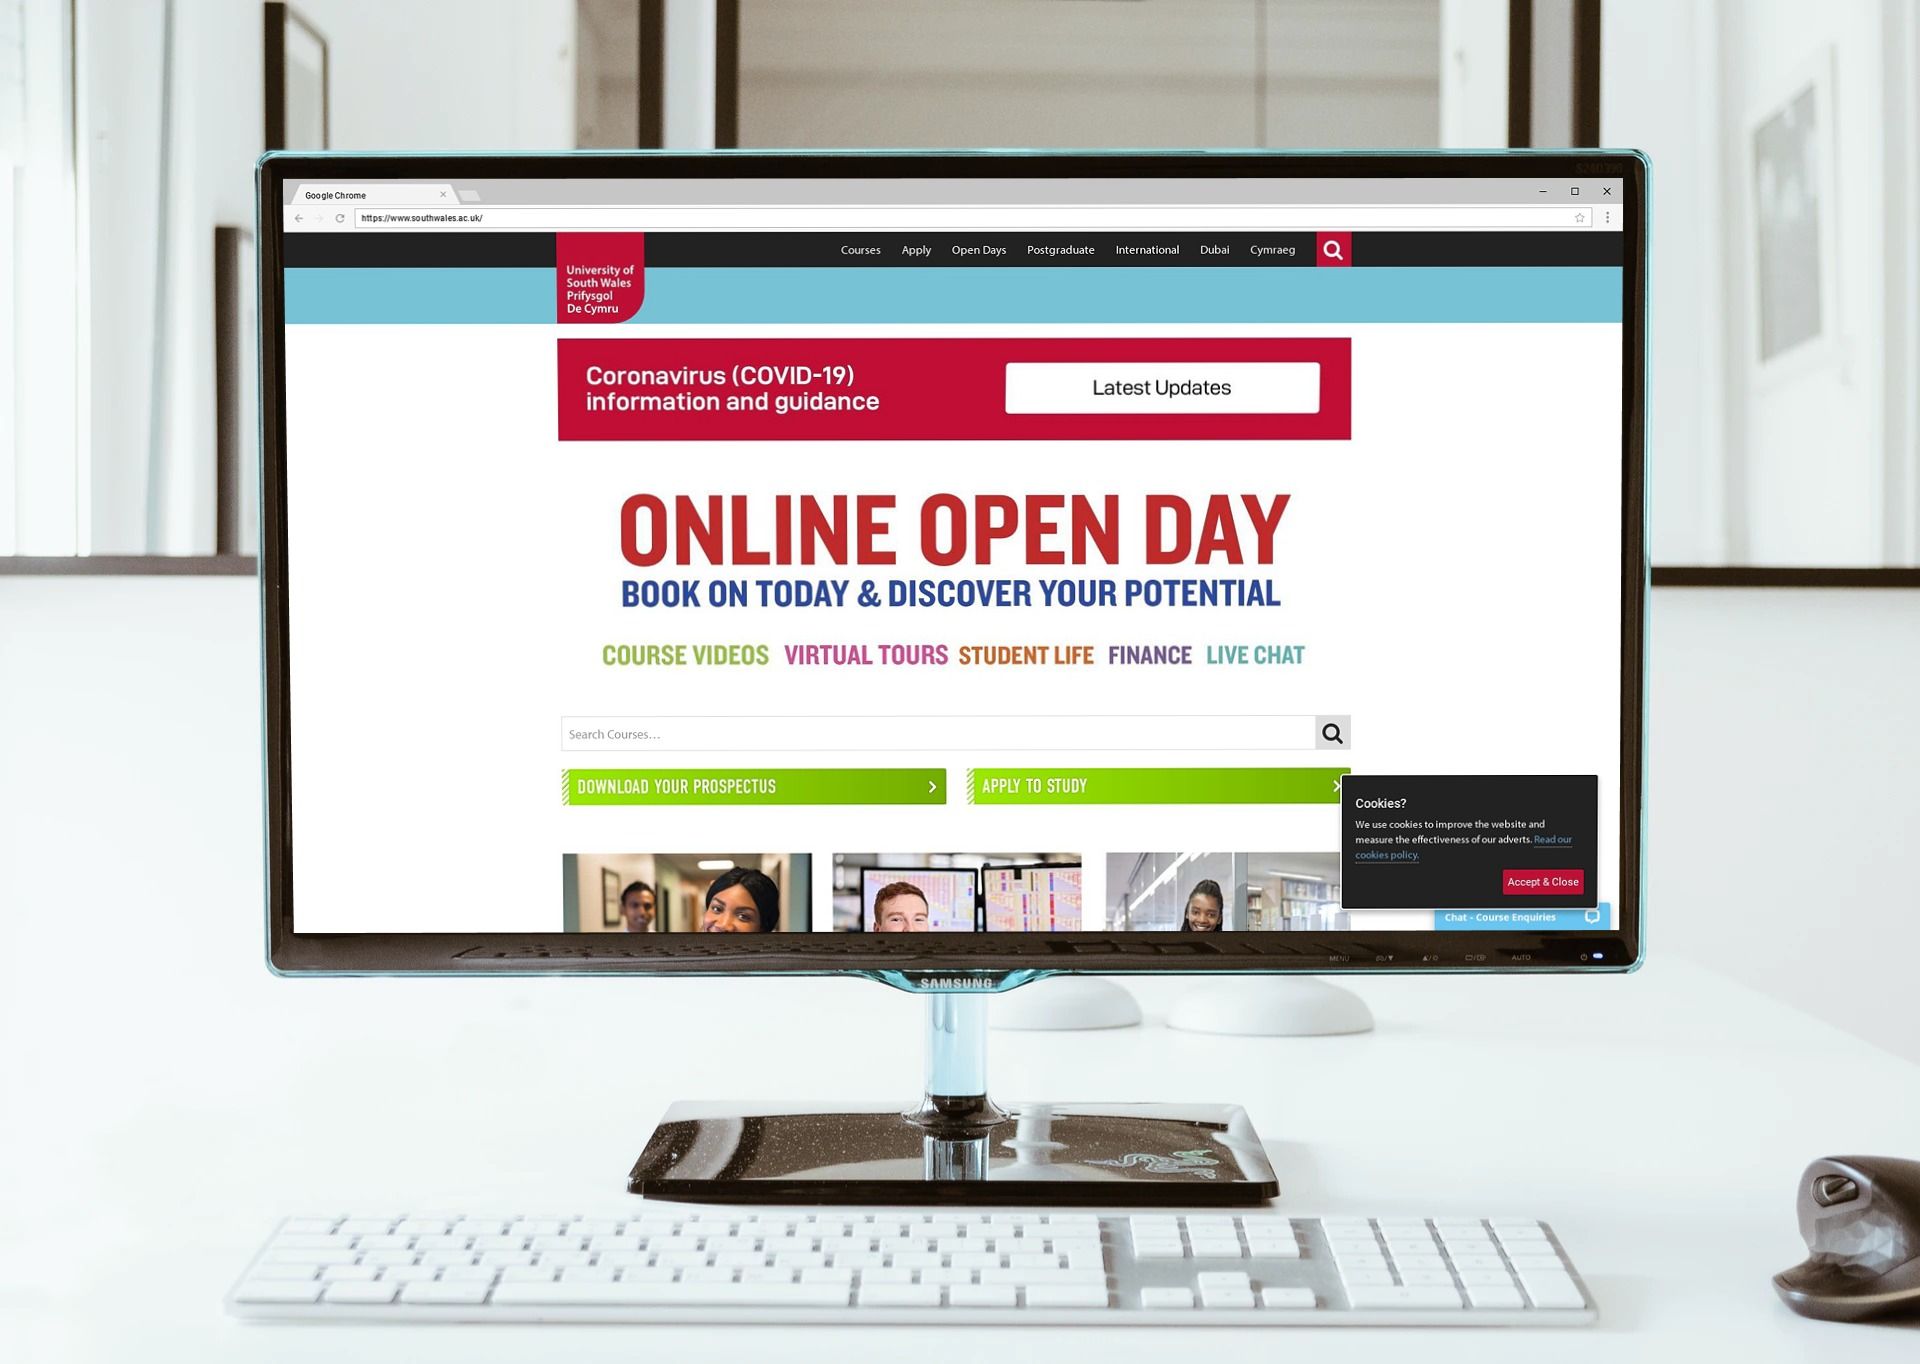 image of desktop screen, open on the university of south wales homepage. it features information on virtual open days at the university